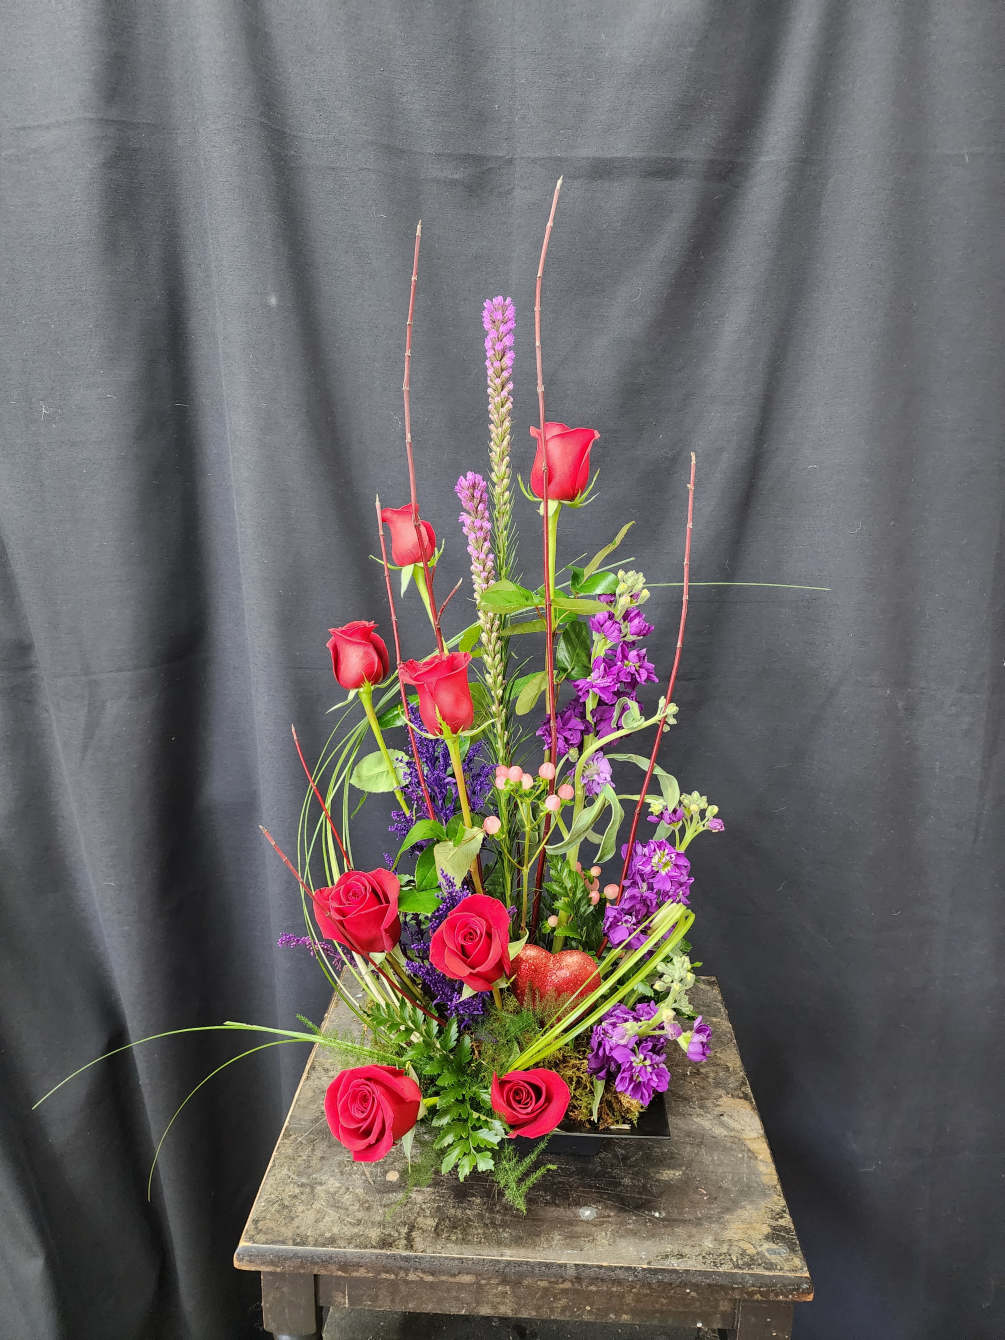 Organic, modern design with traditional red roses and purple accents. Show your